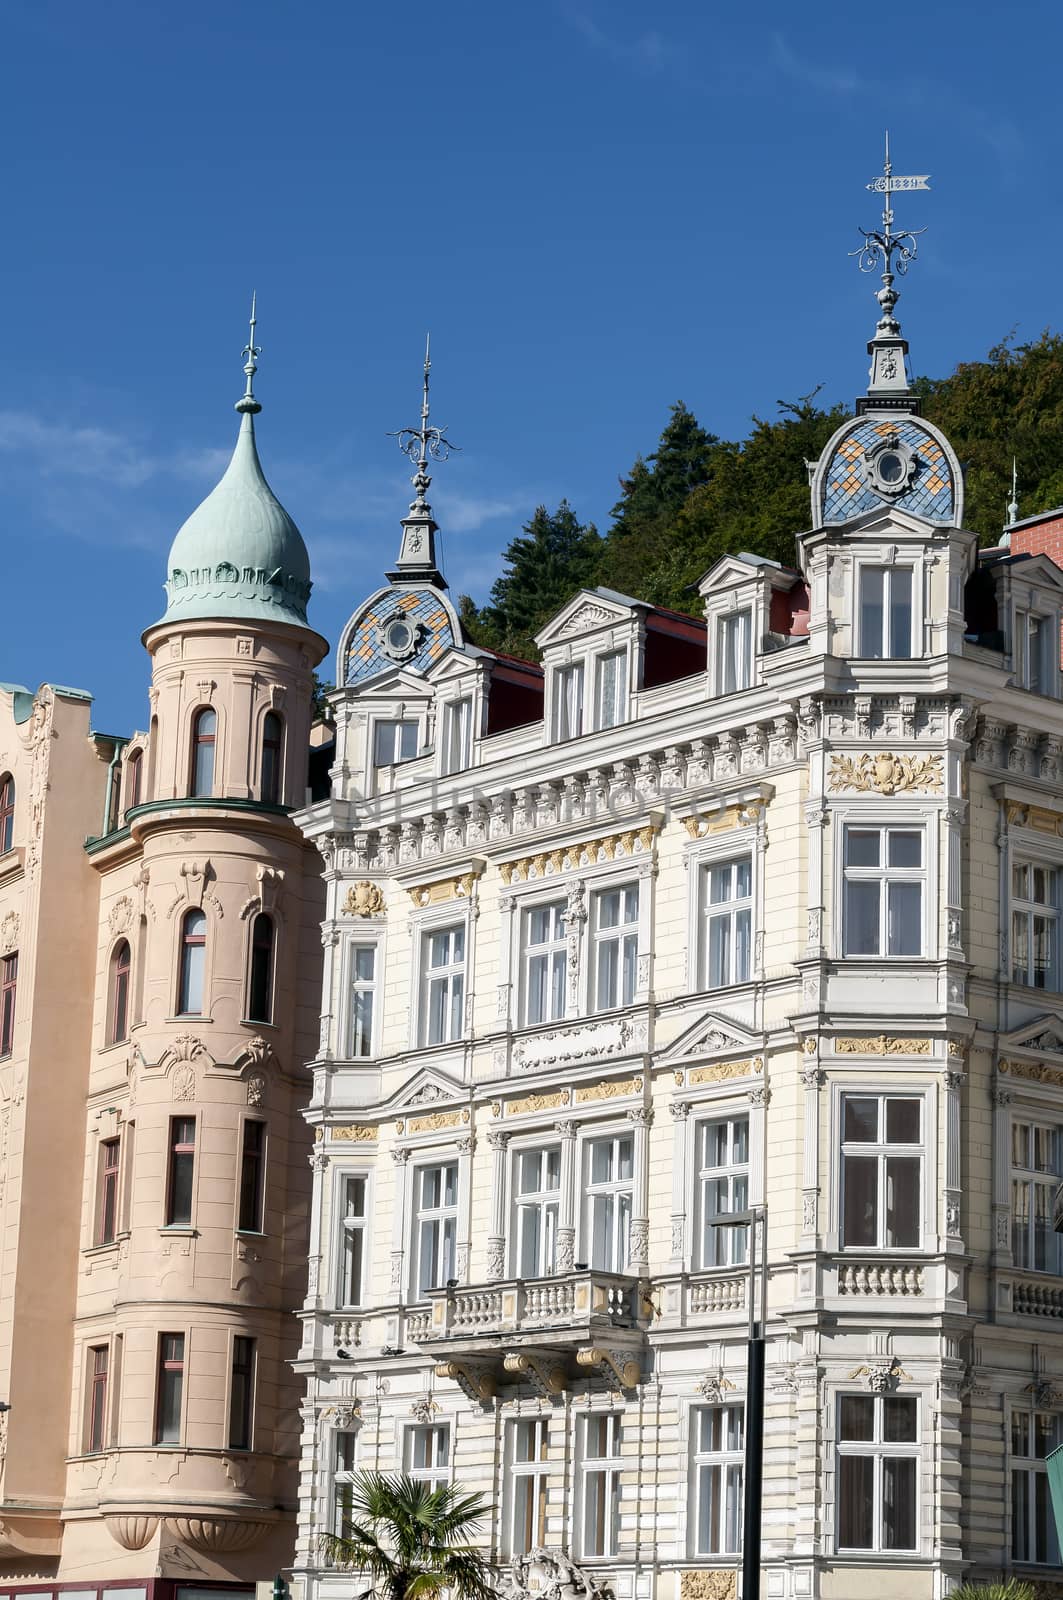 Tradicional Czech architecture in the spa town of Karlovy Vary.